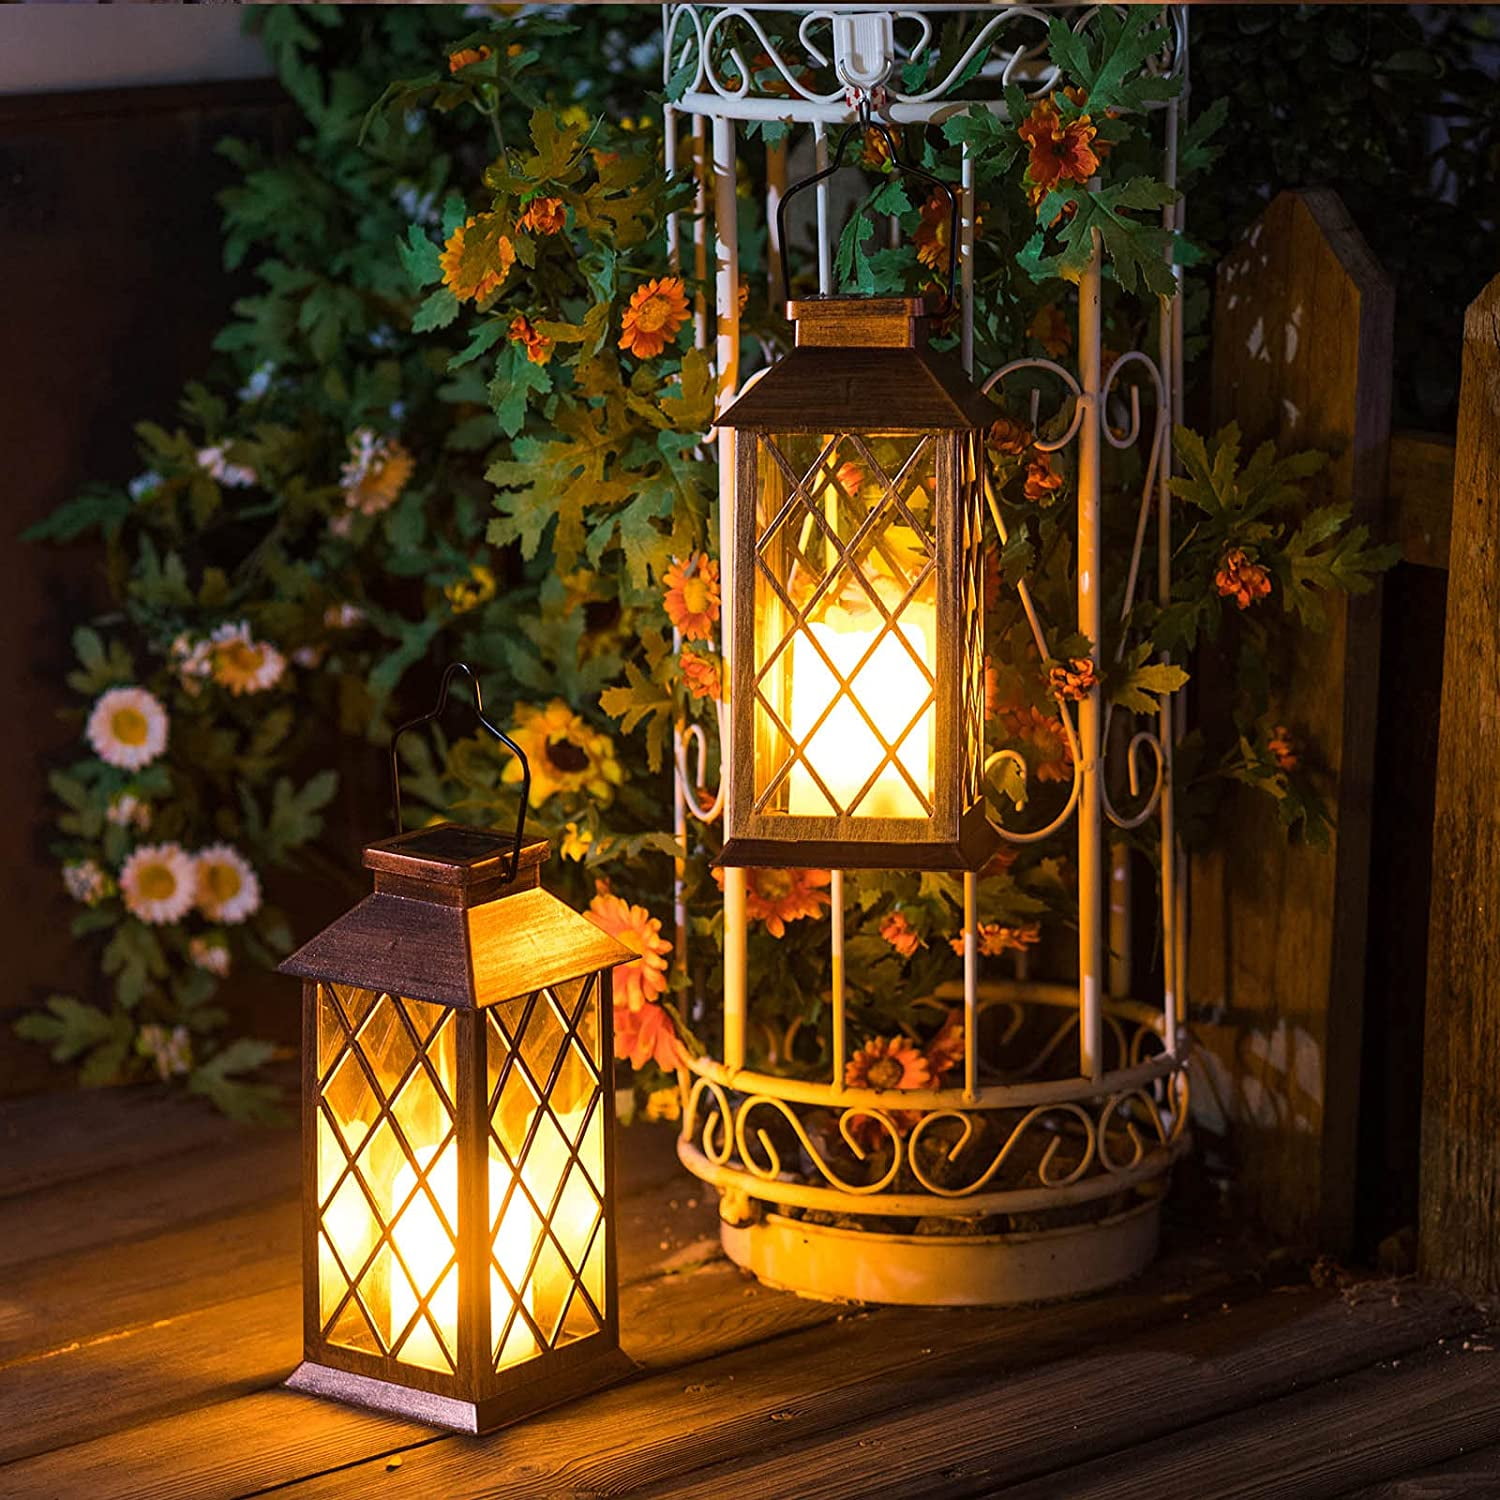 TAKE ME Solar Lantern,Outdoor Garden Hanging Lantern-Waterproof LED Flickering Flameless Candle Mission Lights for Table,Outdoor,Party 